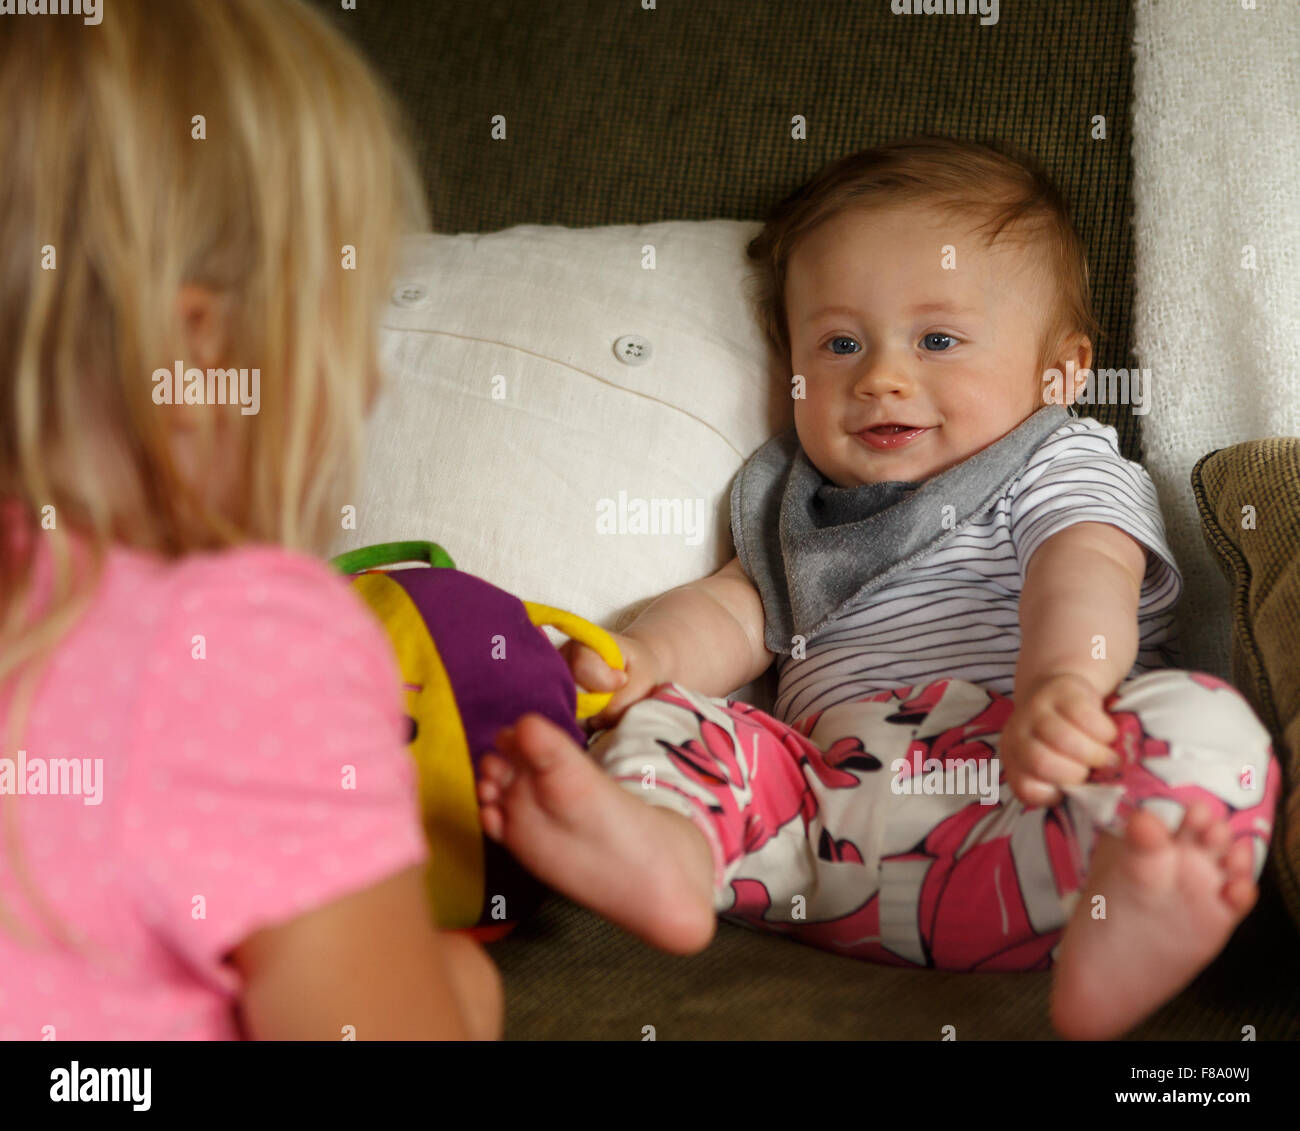 Happy baby leaning back in a sofa and watching older sister Stock Photo